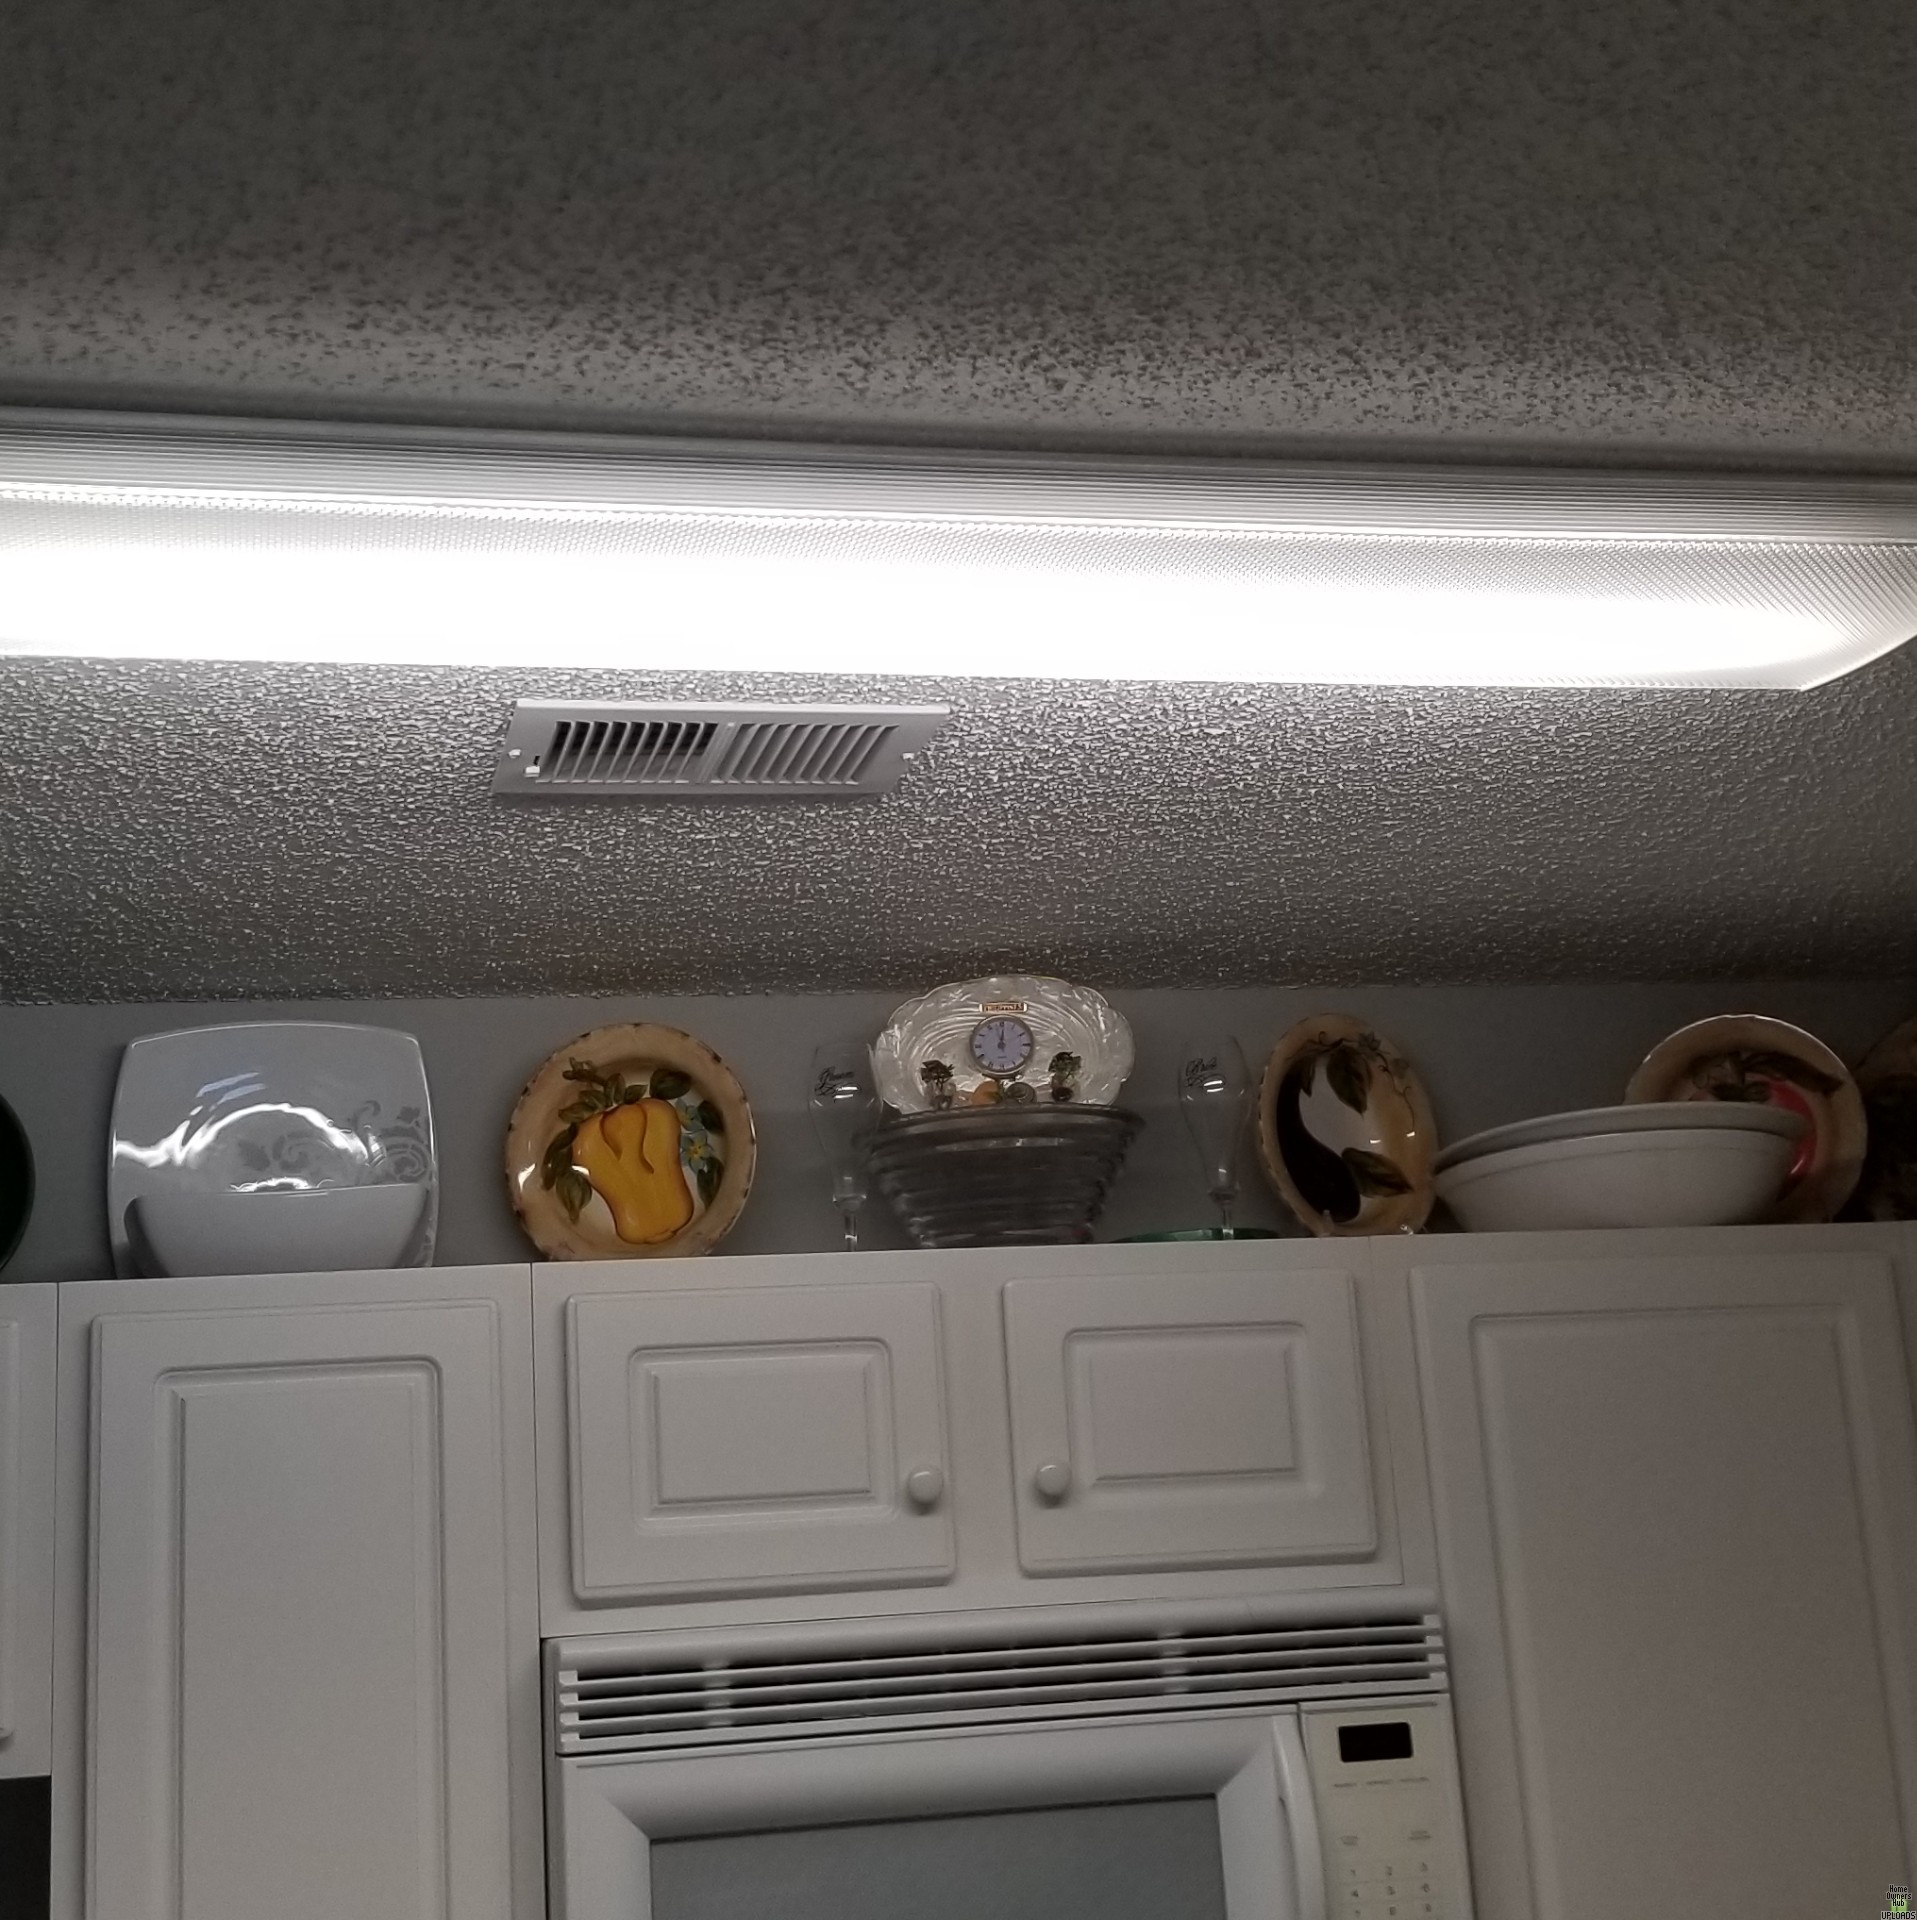 Image for removing acrylic cover from kitchen light